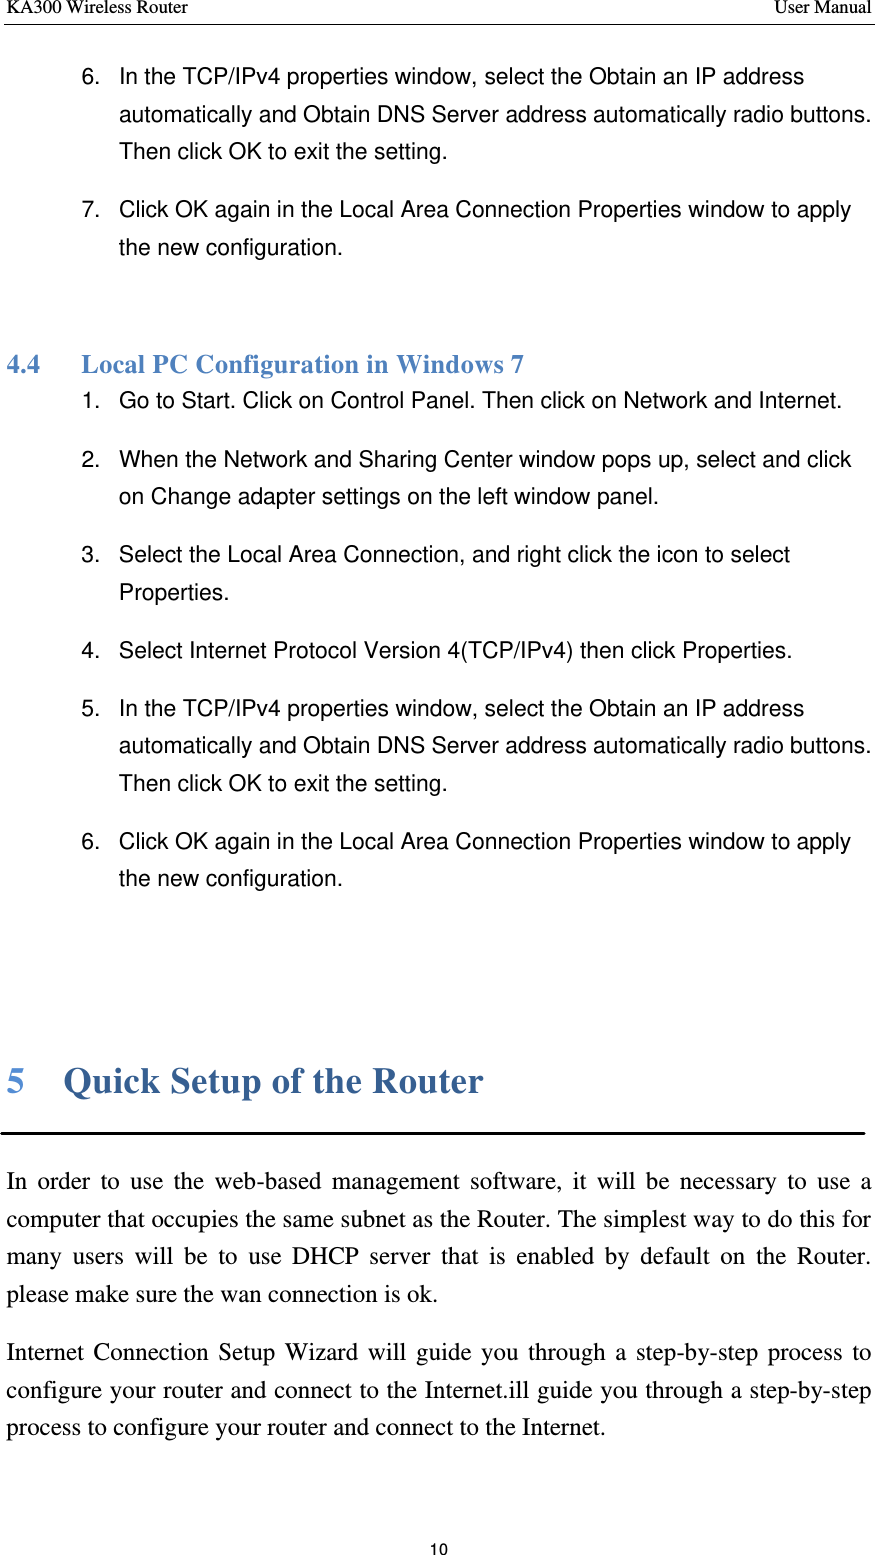 KA300 Wireless Router       User Manual 10  6. In the TCP/IPv4 properties window, select the Obtain an IP address automatically and Obtain DNS Server address automatically radio buttons. Then click OK to exit the setting. 7. Click OK again in the Local Area Connection Properties window to apply the new configuration.  4.4   Local PC Configuration in Windows 7 1. Go to Start. Click on Control Panel. Then click on Network and Internet. 2. When the Network and Sharing Center window pops up, select and click on Change adapter settings on the left window panel. 3. Select the Local Area Connection, and right click the icon to select Properties. 4. Select Internet Protocol Version 4(TCP/IPv4) then click Properties. 5. In the TCP/IPv4 properties window, select the Obtain an IP address automatically and Obtain DNS Server address automatically radio buttons. Then click OK to exit the setting. 6. Click OK again in the Local Area Connection Properties window to apply the new configuration.   5    Quick Setup of the Router  In order to use the web-based management software, it will be necessary to use a computer that occupies the same subnet as the Router. The simplest way to do this for many users will be to use DHCP server that is enabled by default on the Router. please make sure the wan connection is ok. Internet Connection Setup Wizard will guide you through a step-by-step process to configure your router and connect to the Internet.ill guide you through a step-by-step process to configure your router and connect to the Internet. 